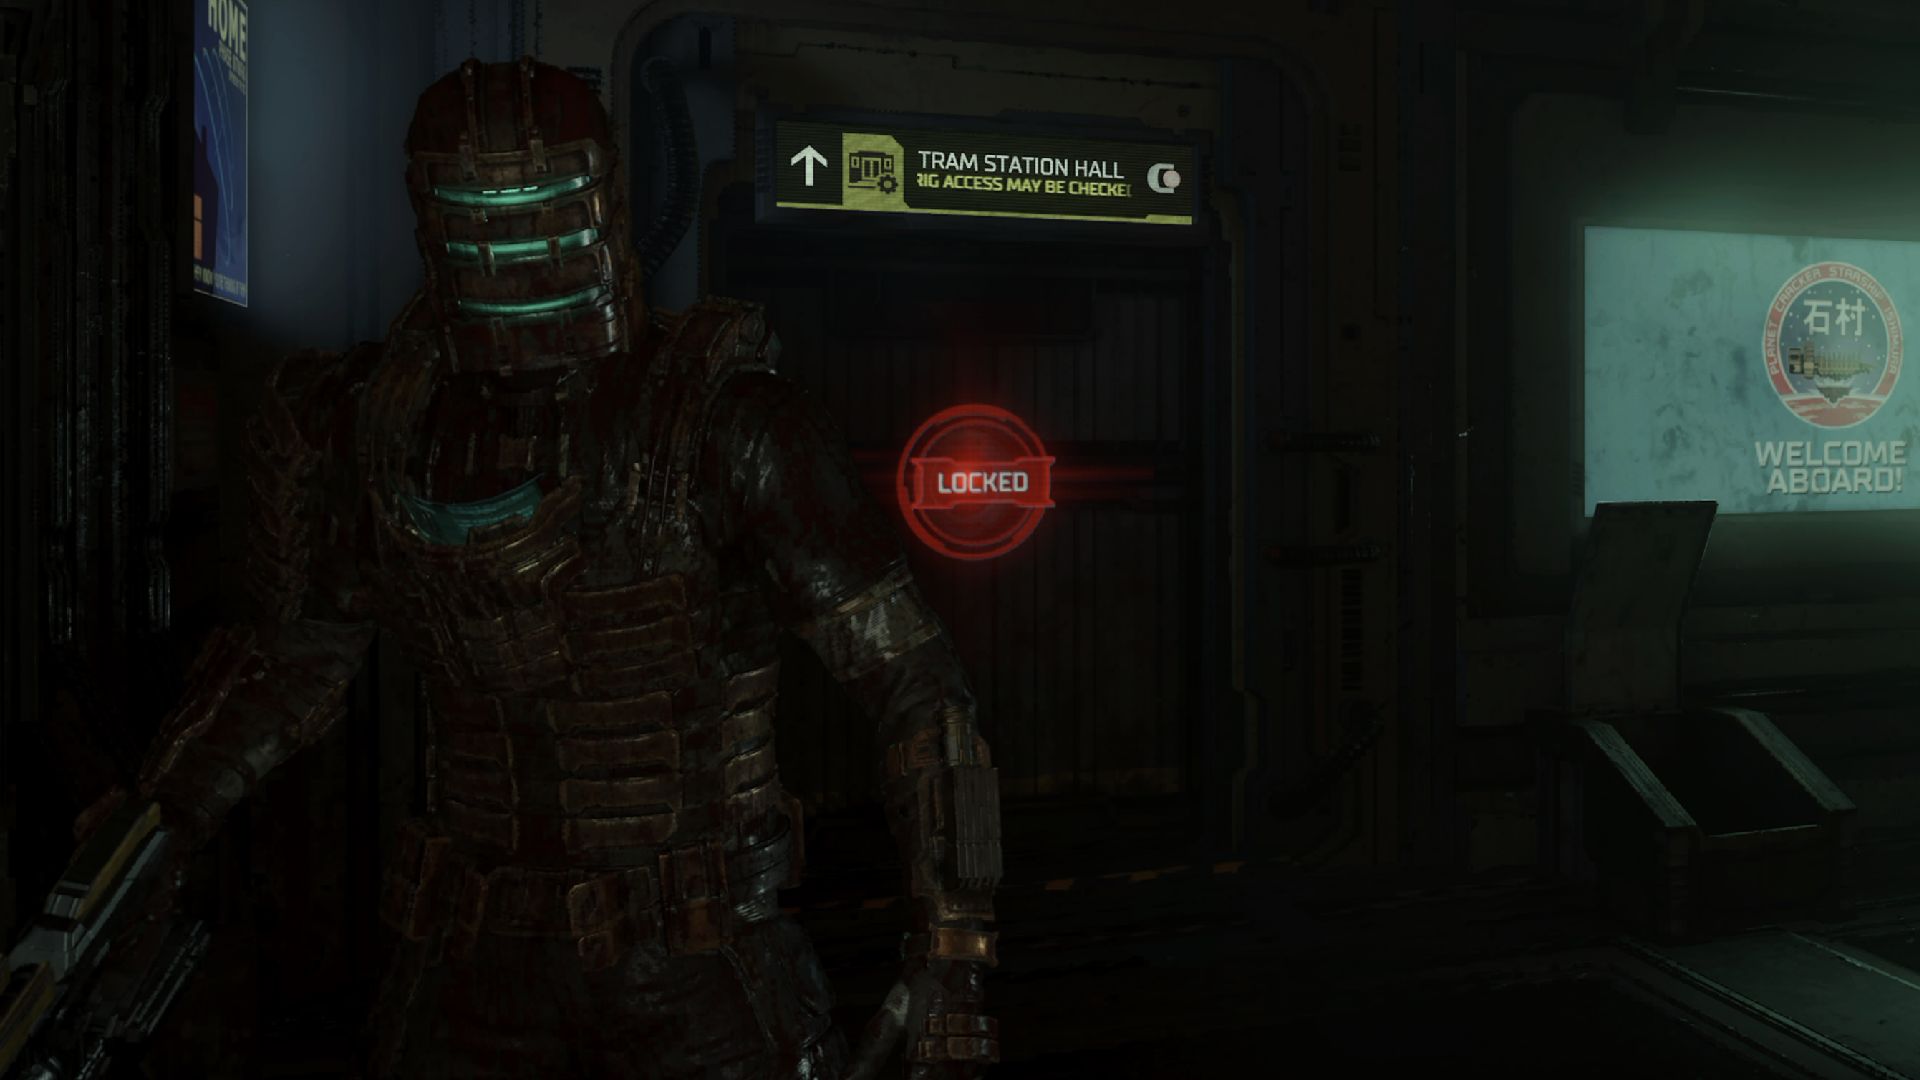 All unused suits in Dead Space 3